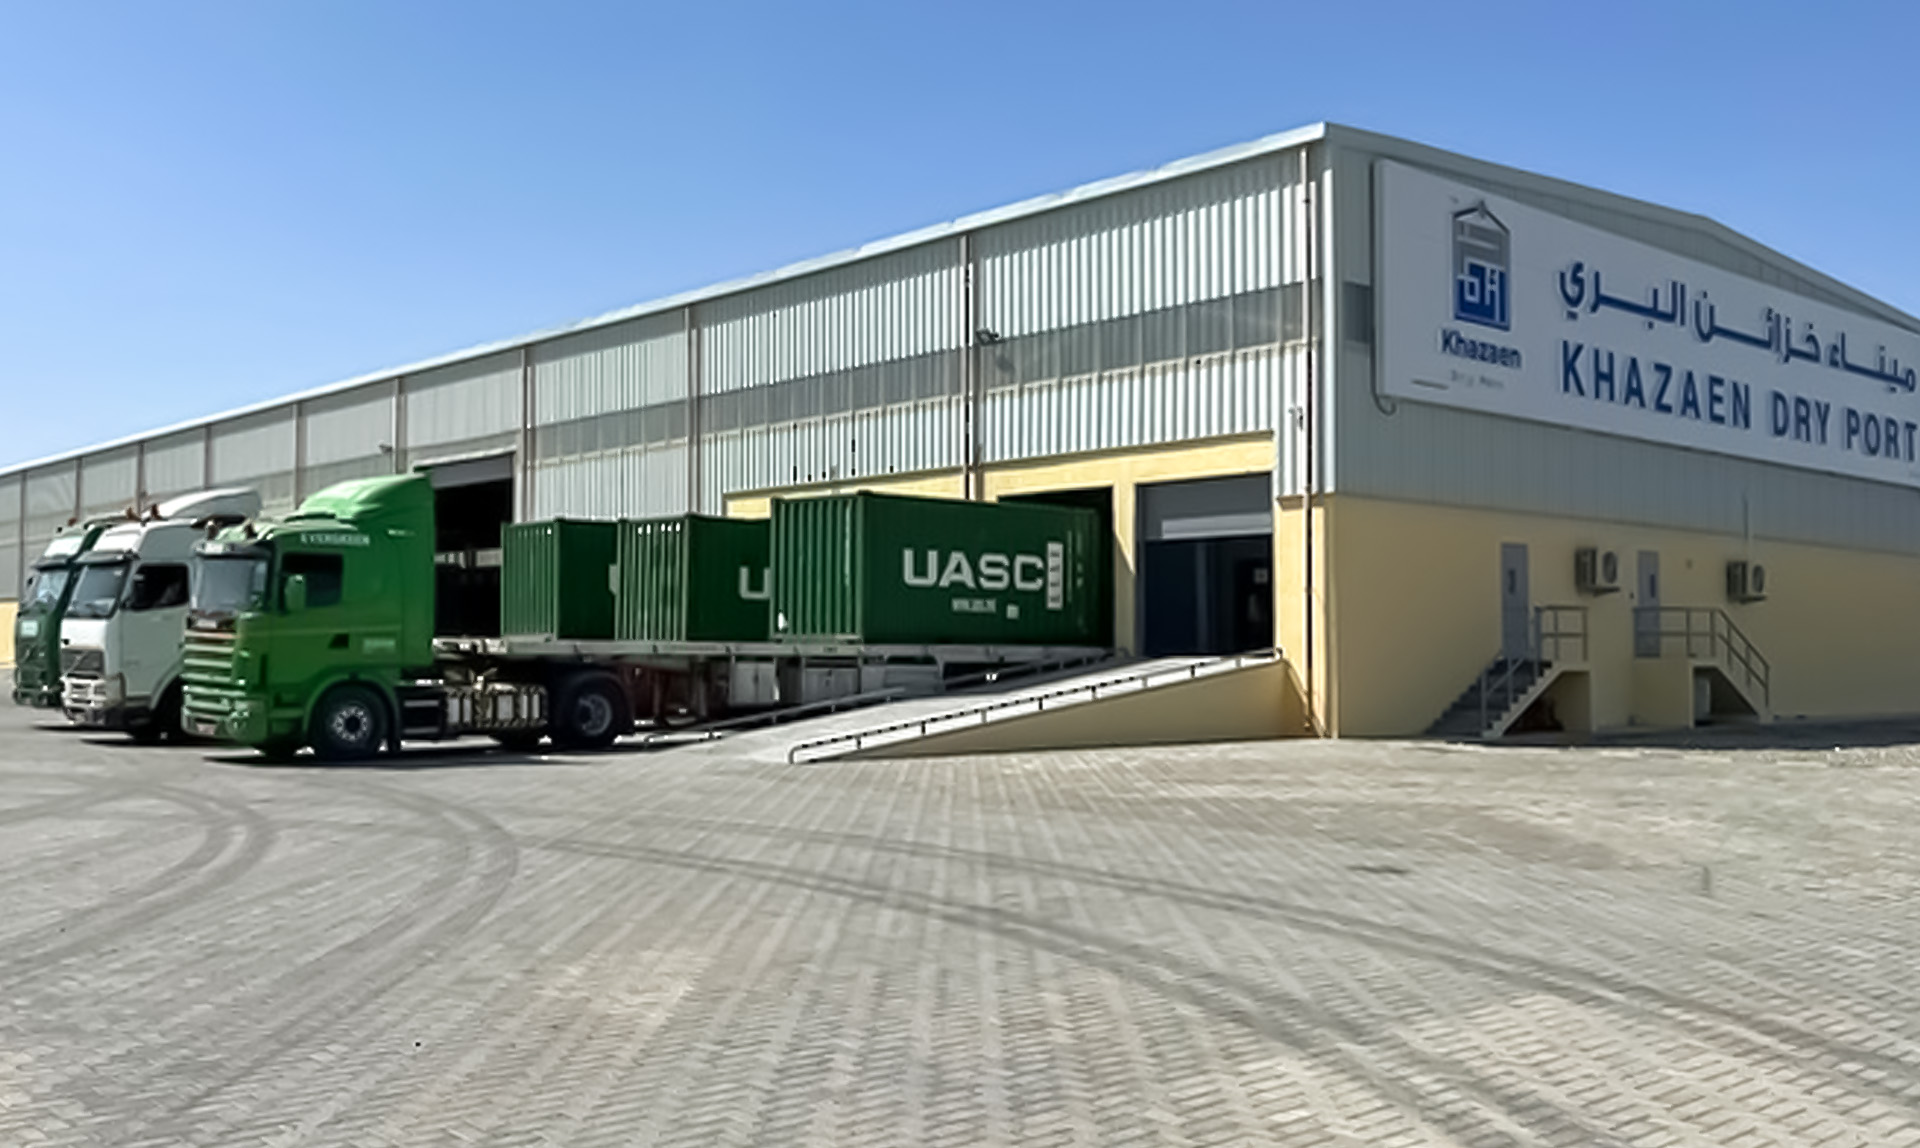 Khazaen Dry Port launches partial shipment service for business and industry